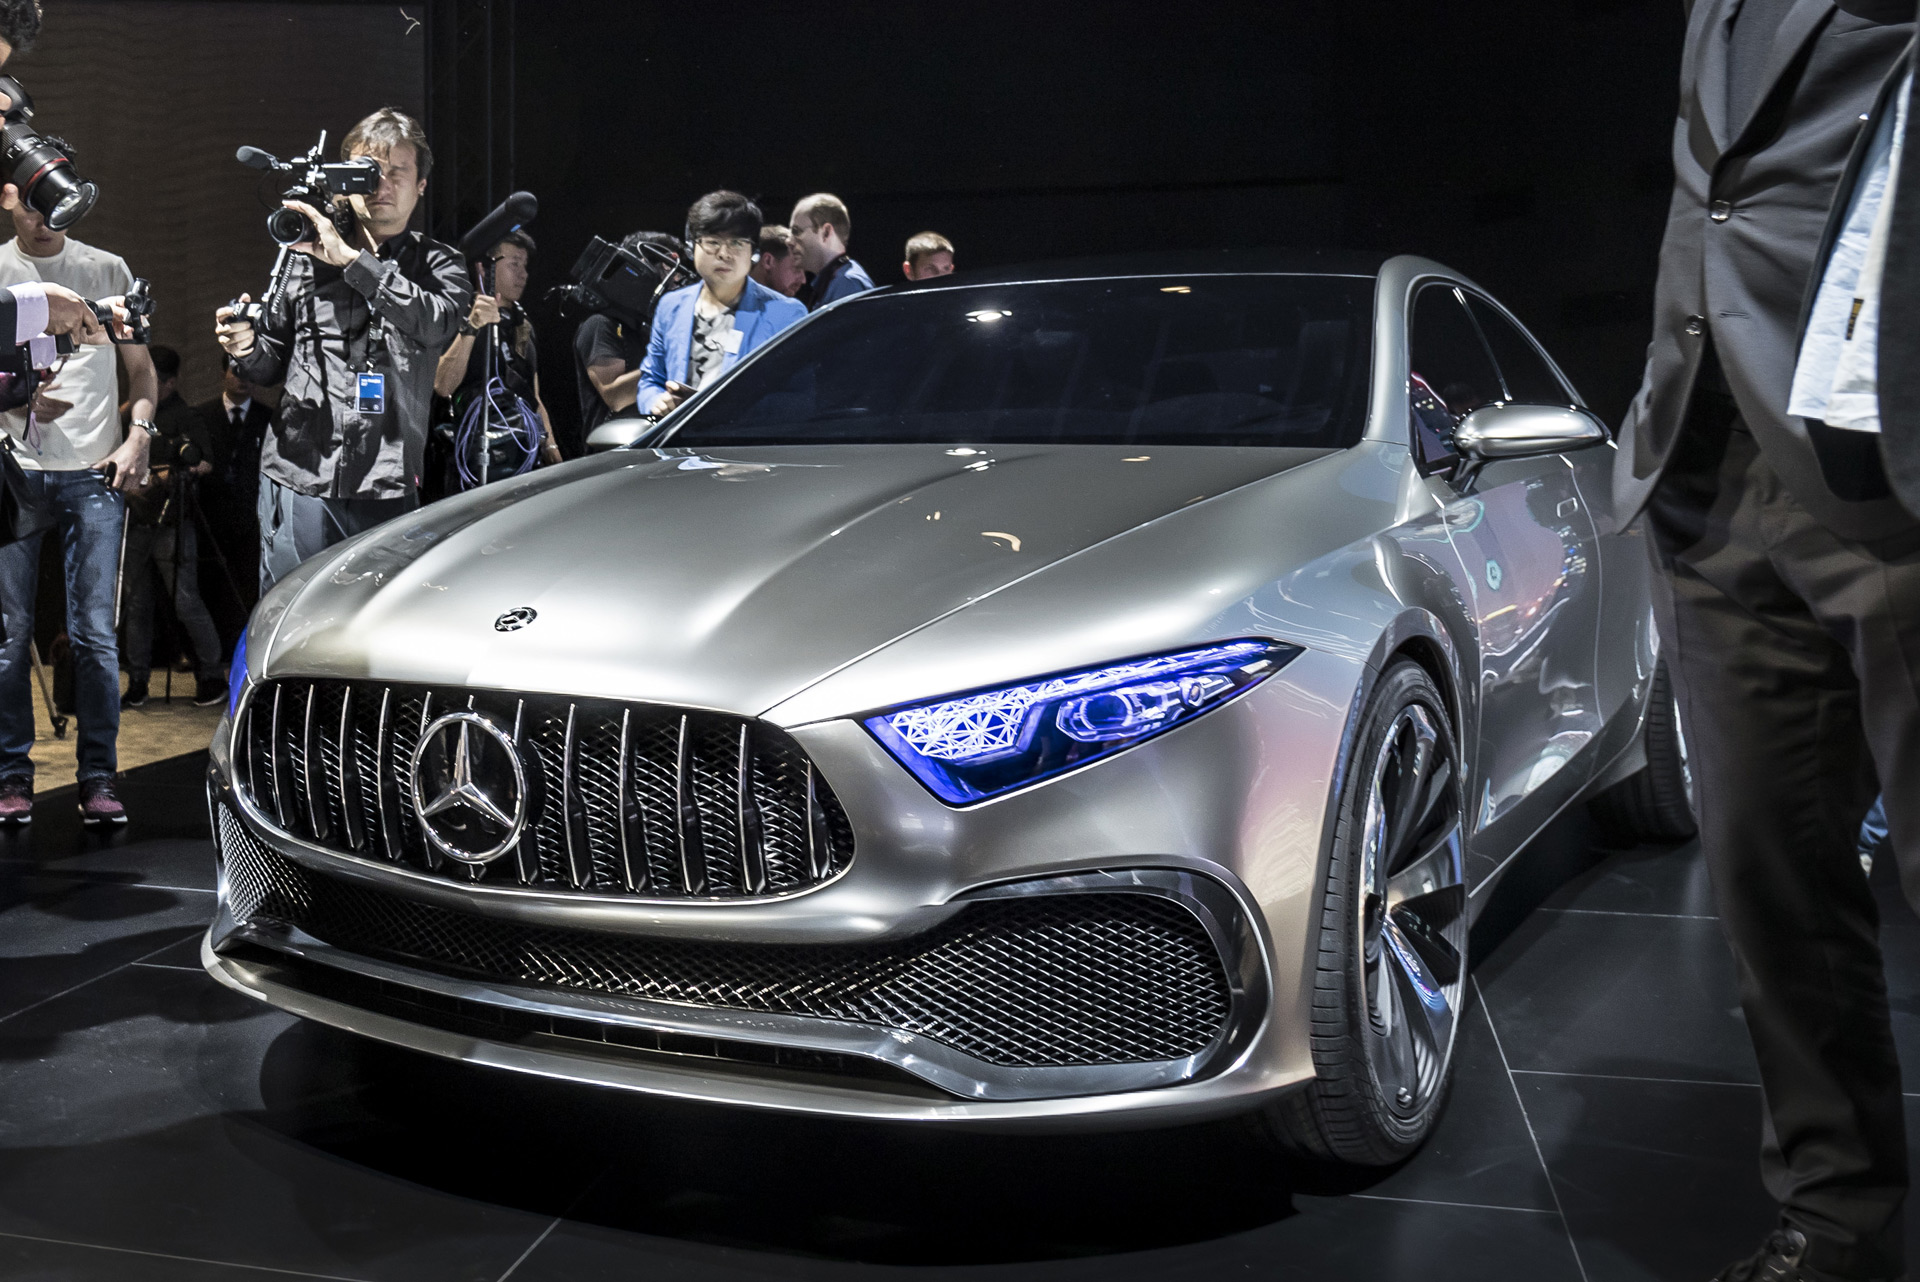 Mercedes-AMG plans 2-tier performance for next-gen compacts1920 x 1282